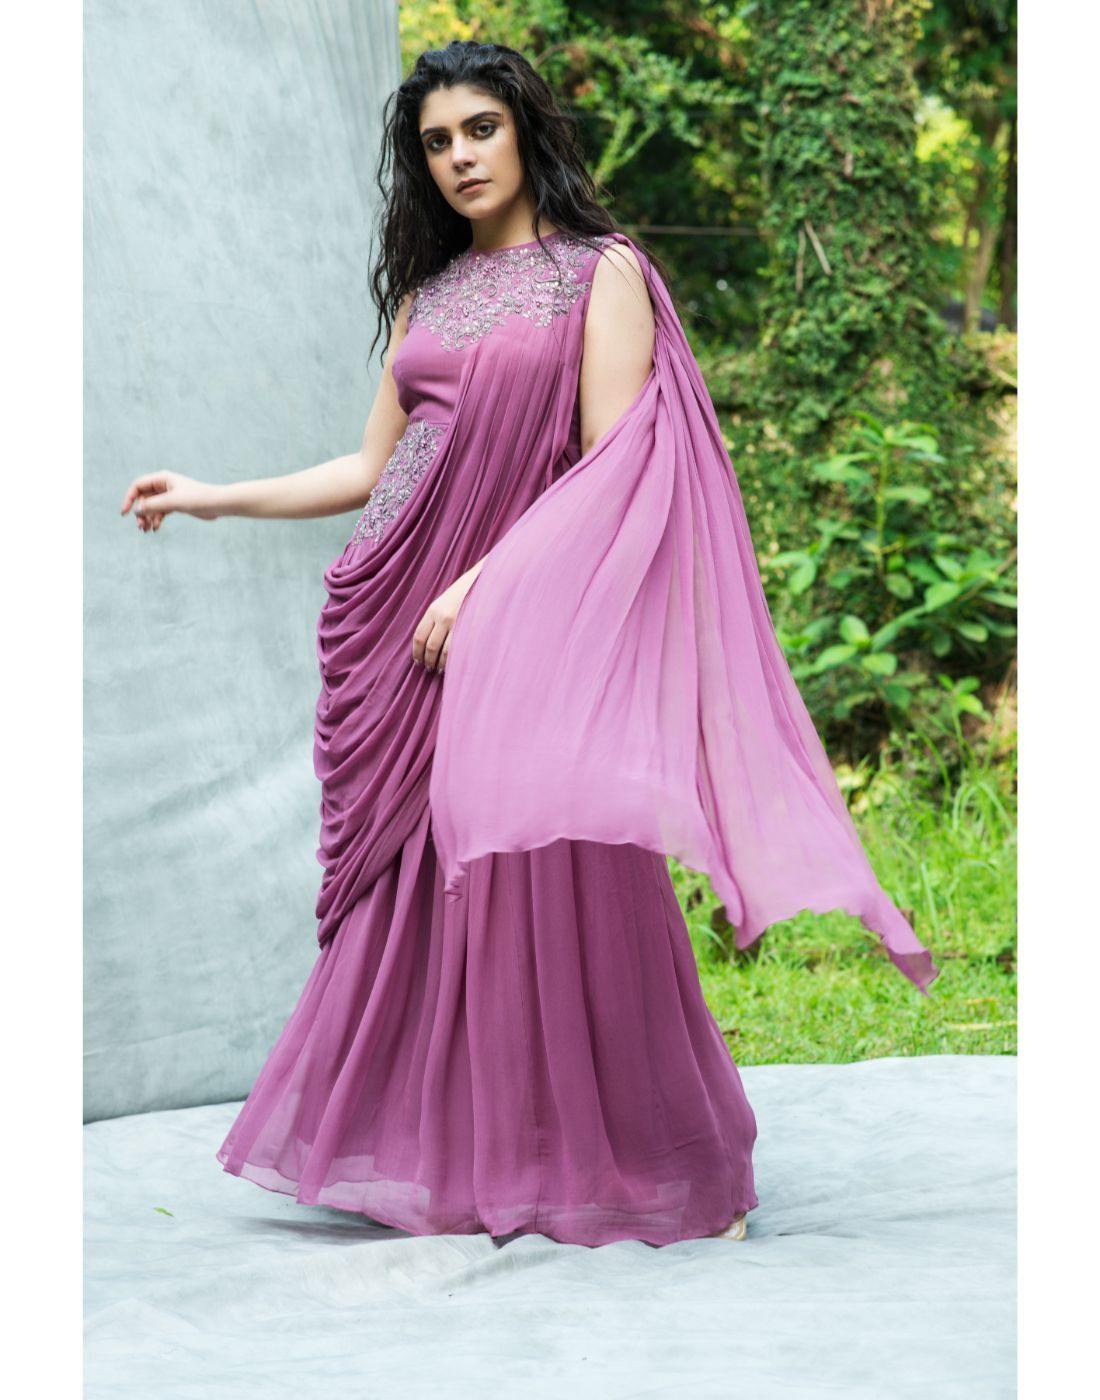 Arhams Presents | Saree gown, Saree style gown, Saree gowns